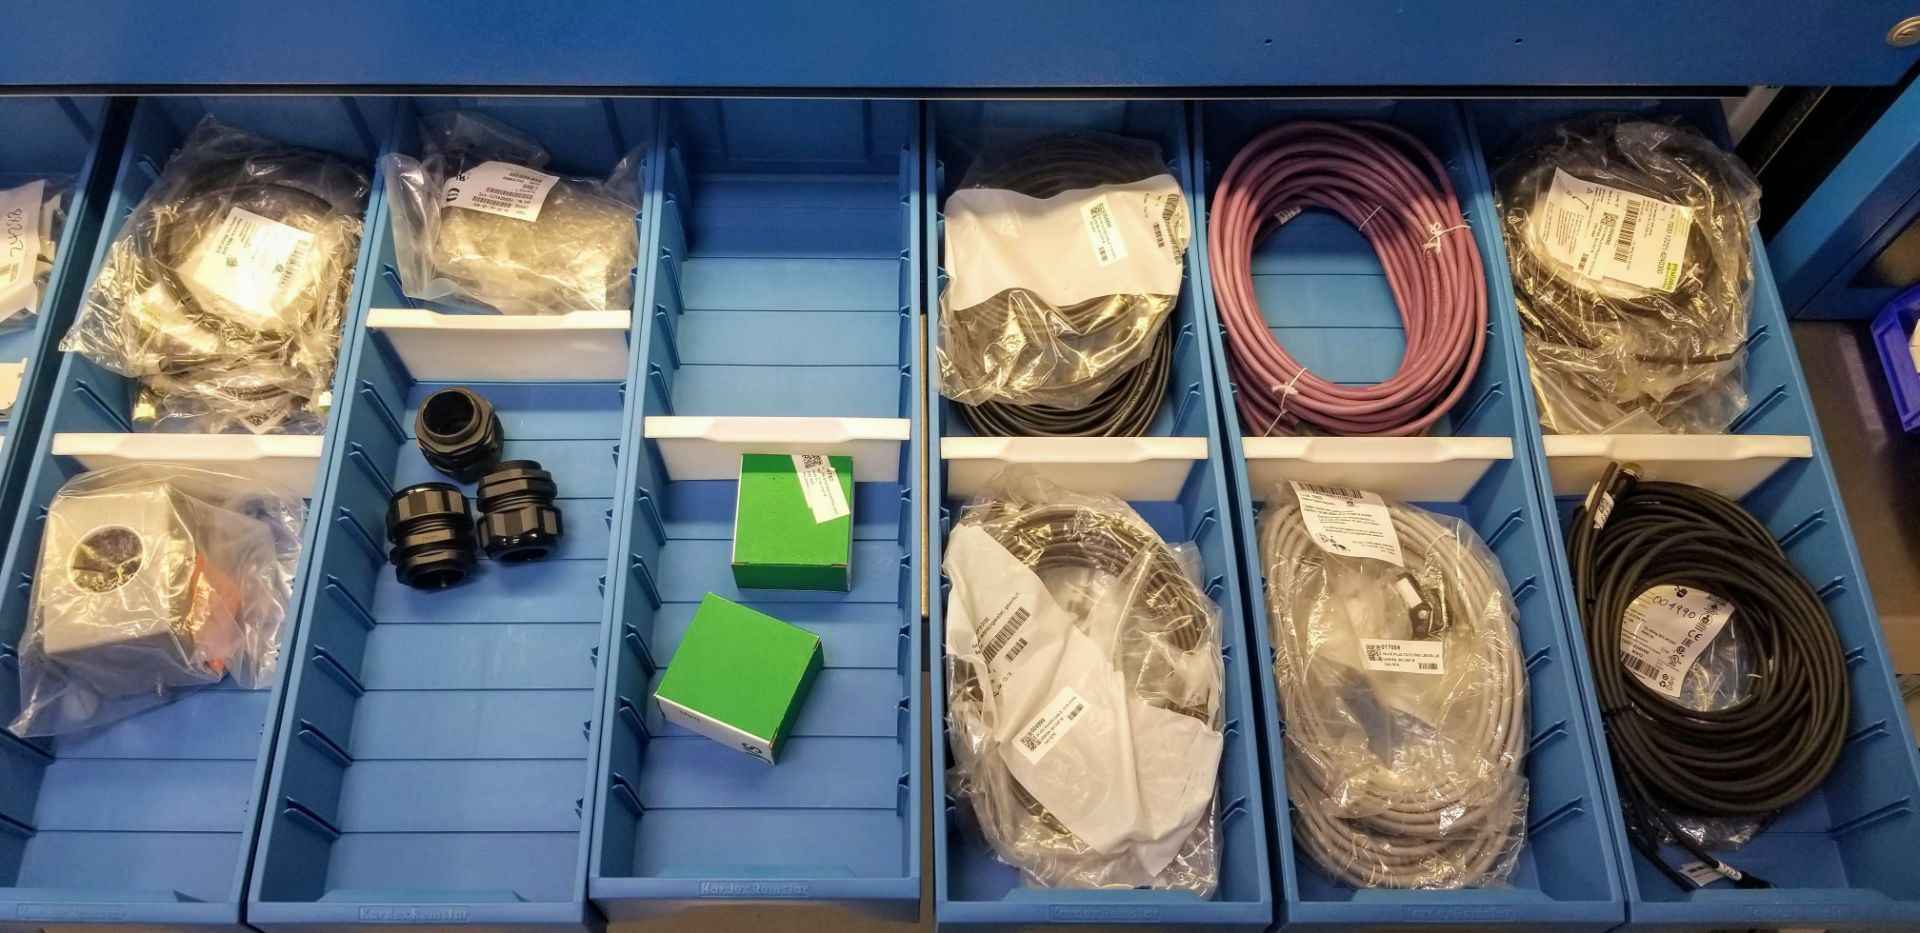 LOT - CONTENTS OF 36 SHELVES INCLUDING: MOTOR CABLES, HYBRID CABLES, PLUGS, INPUT CARDS, MODULES, - Image 56 of 100